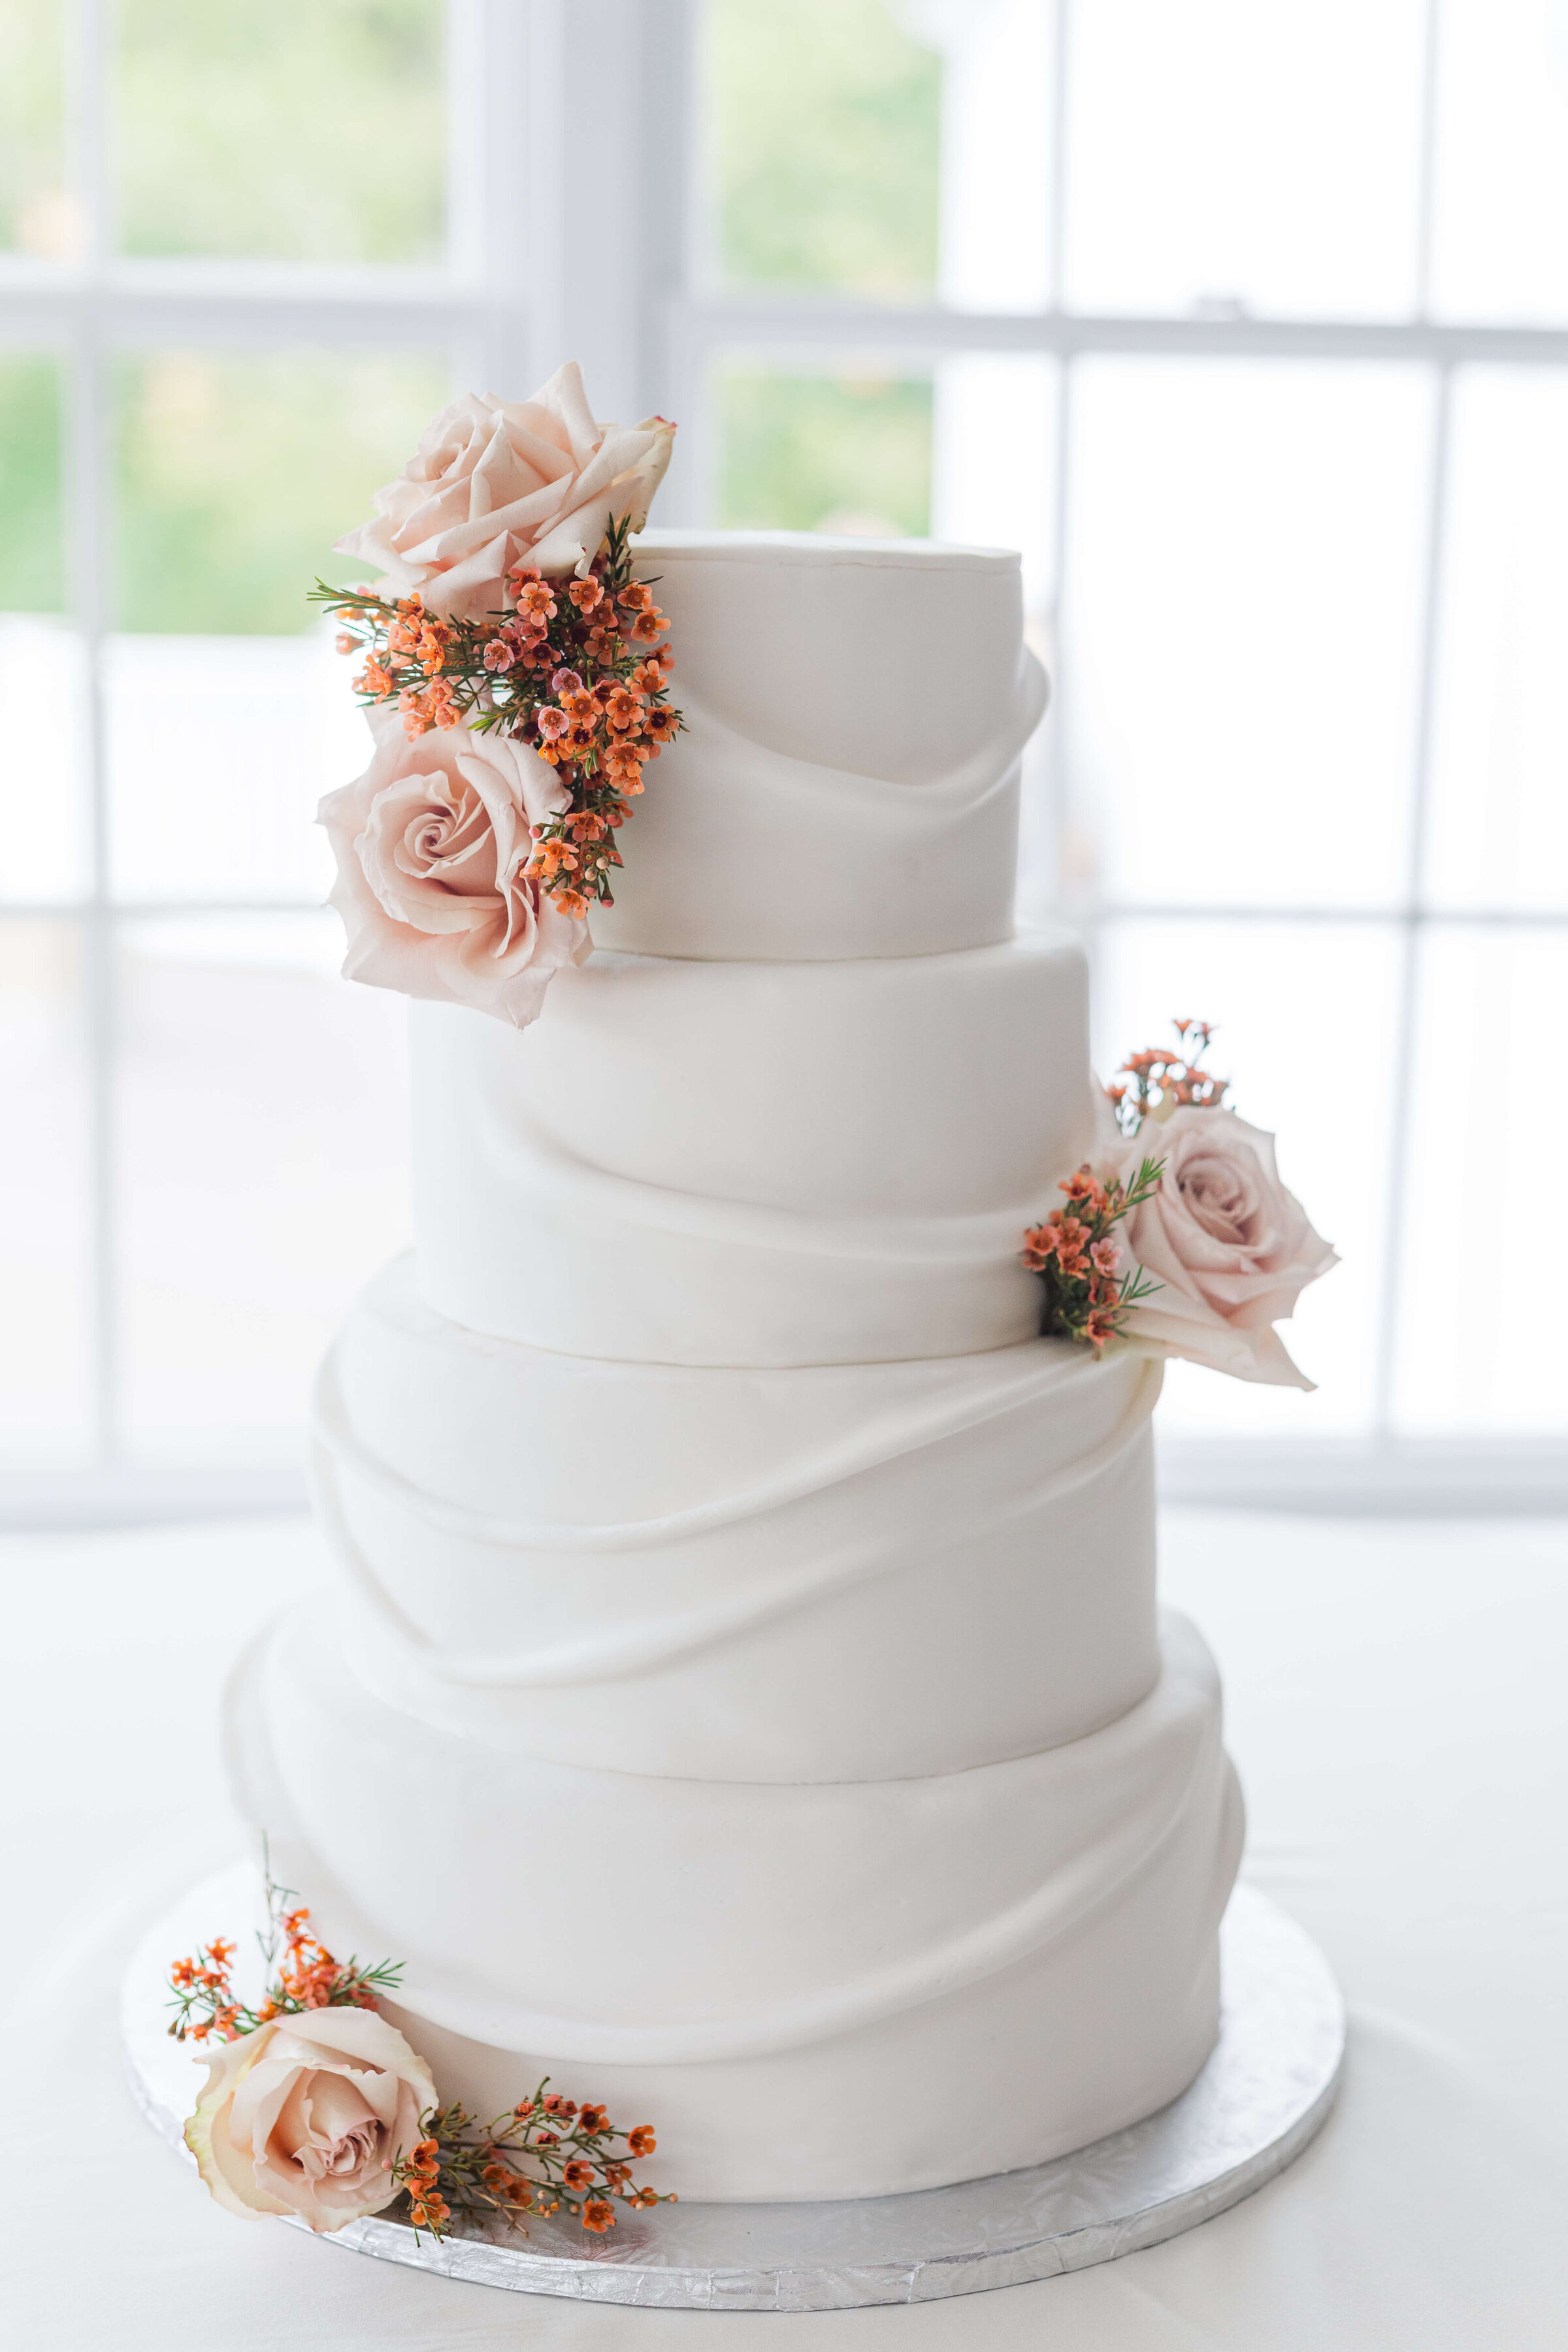 A white wedding cake with peach flowers on it. It's in front of a white window and on top of a white table cloth